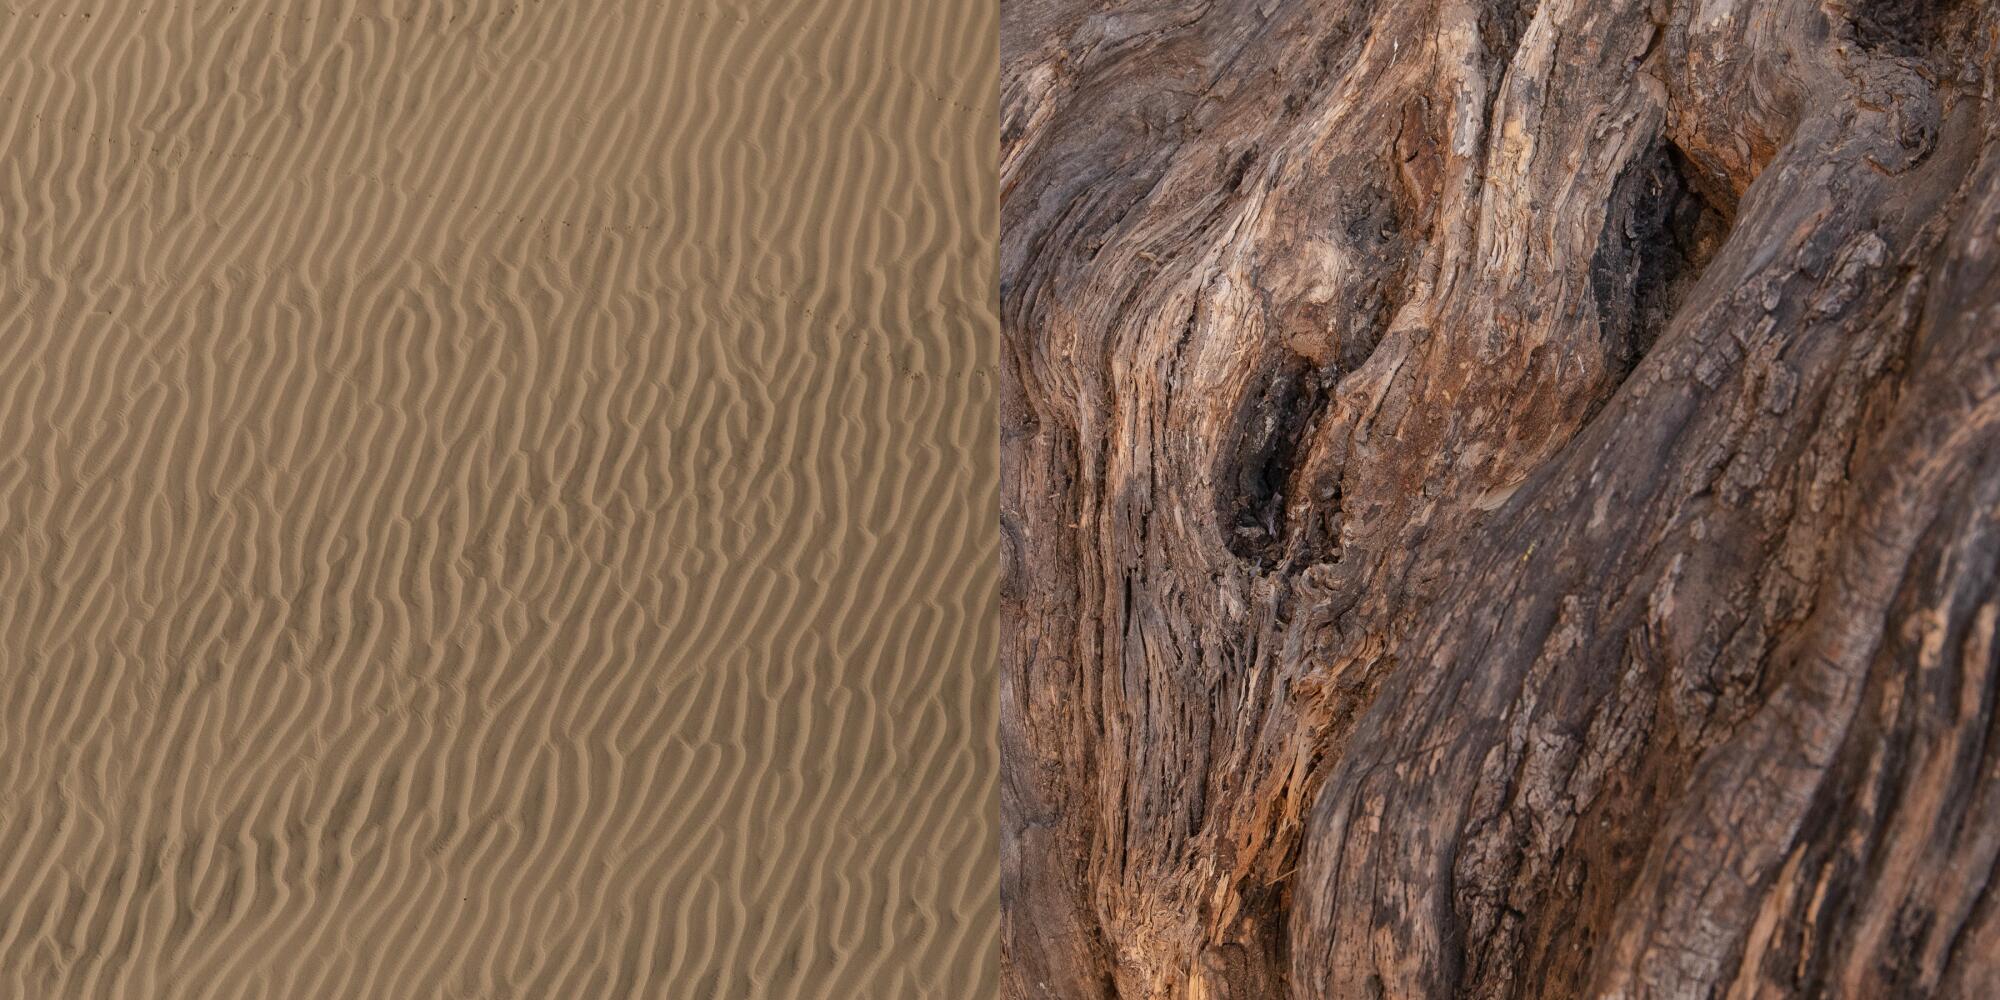 Two photos side by side showing the textures of wind-blown sand, left, and gnarled olive wood, right.